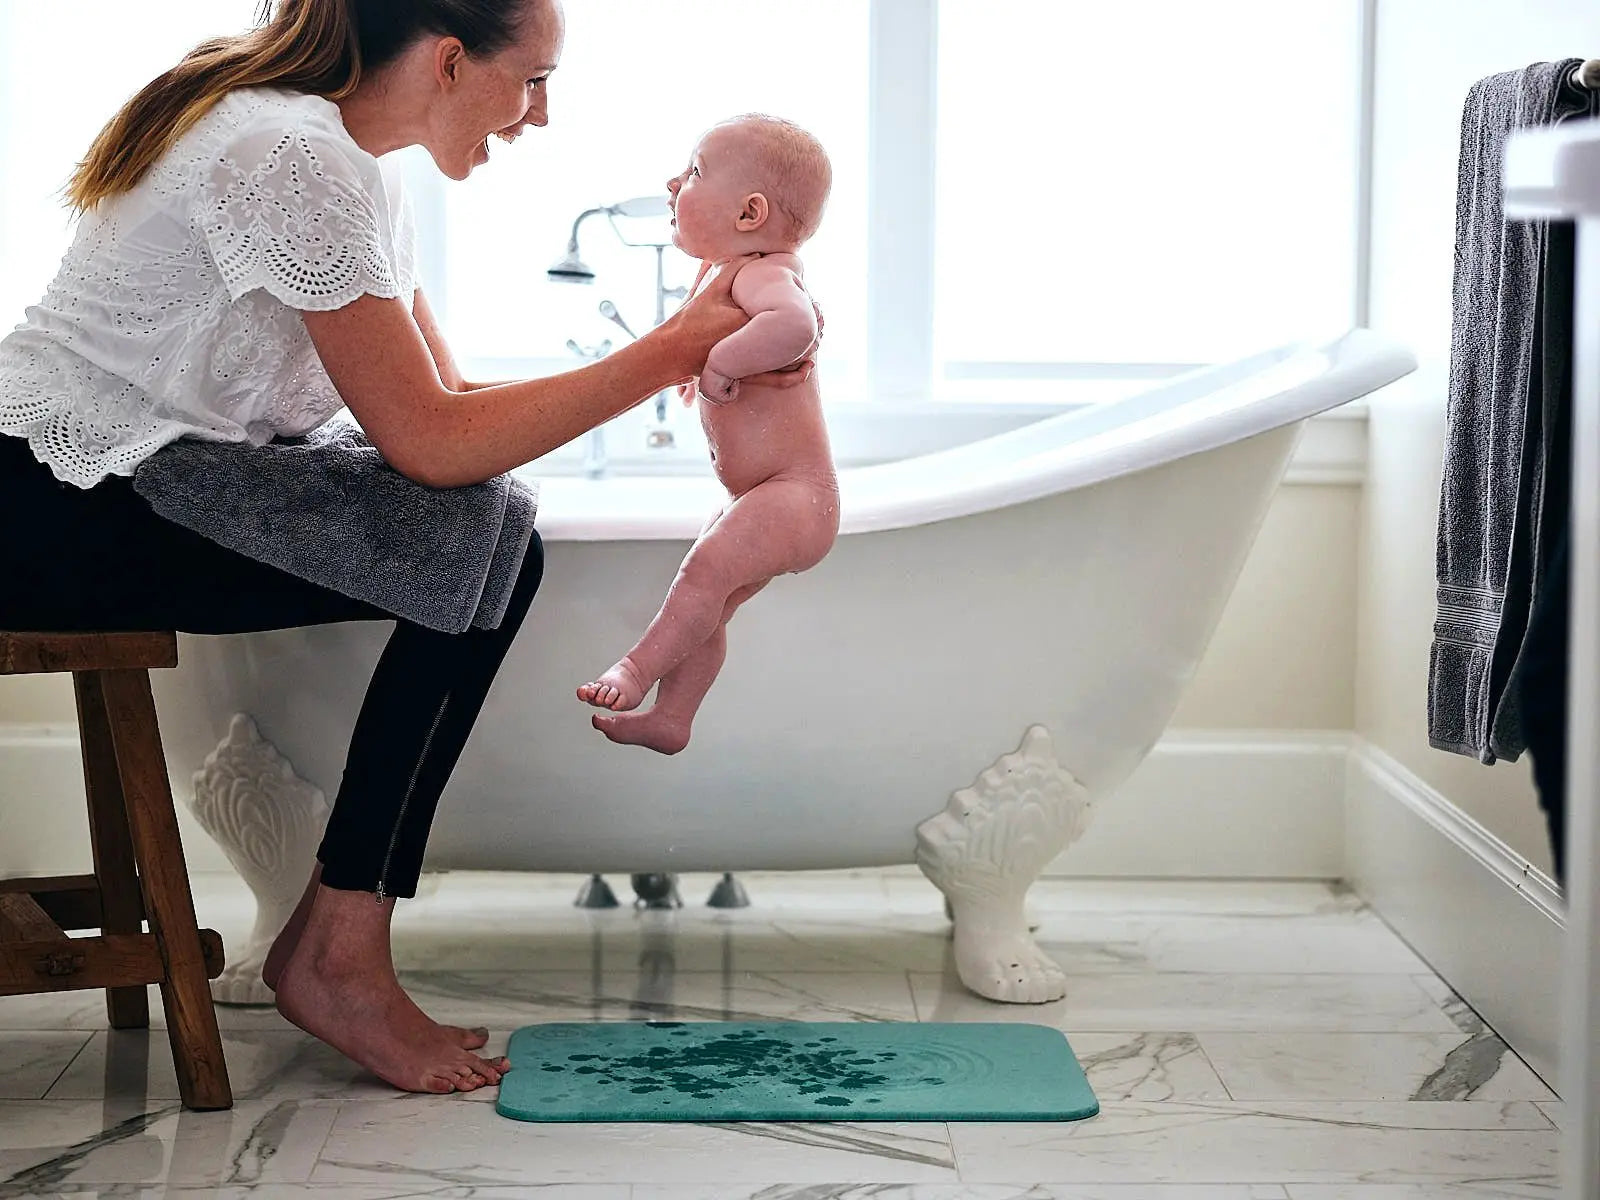 mother with a baby in a bathroom